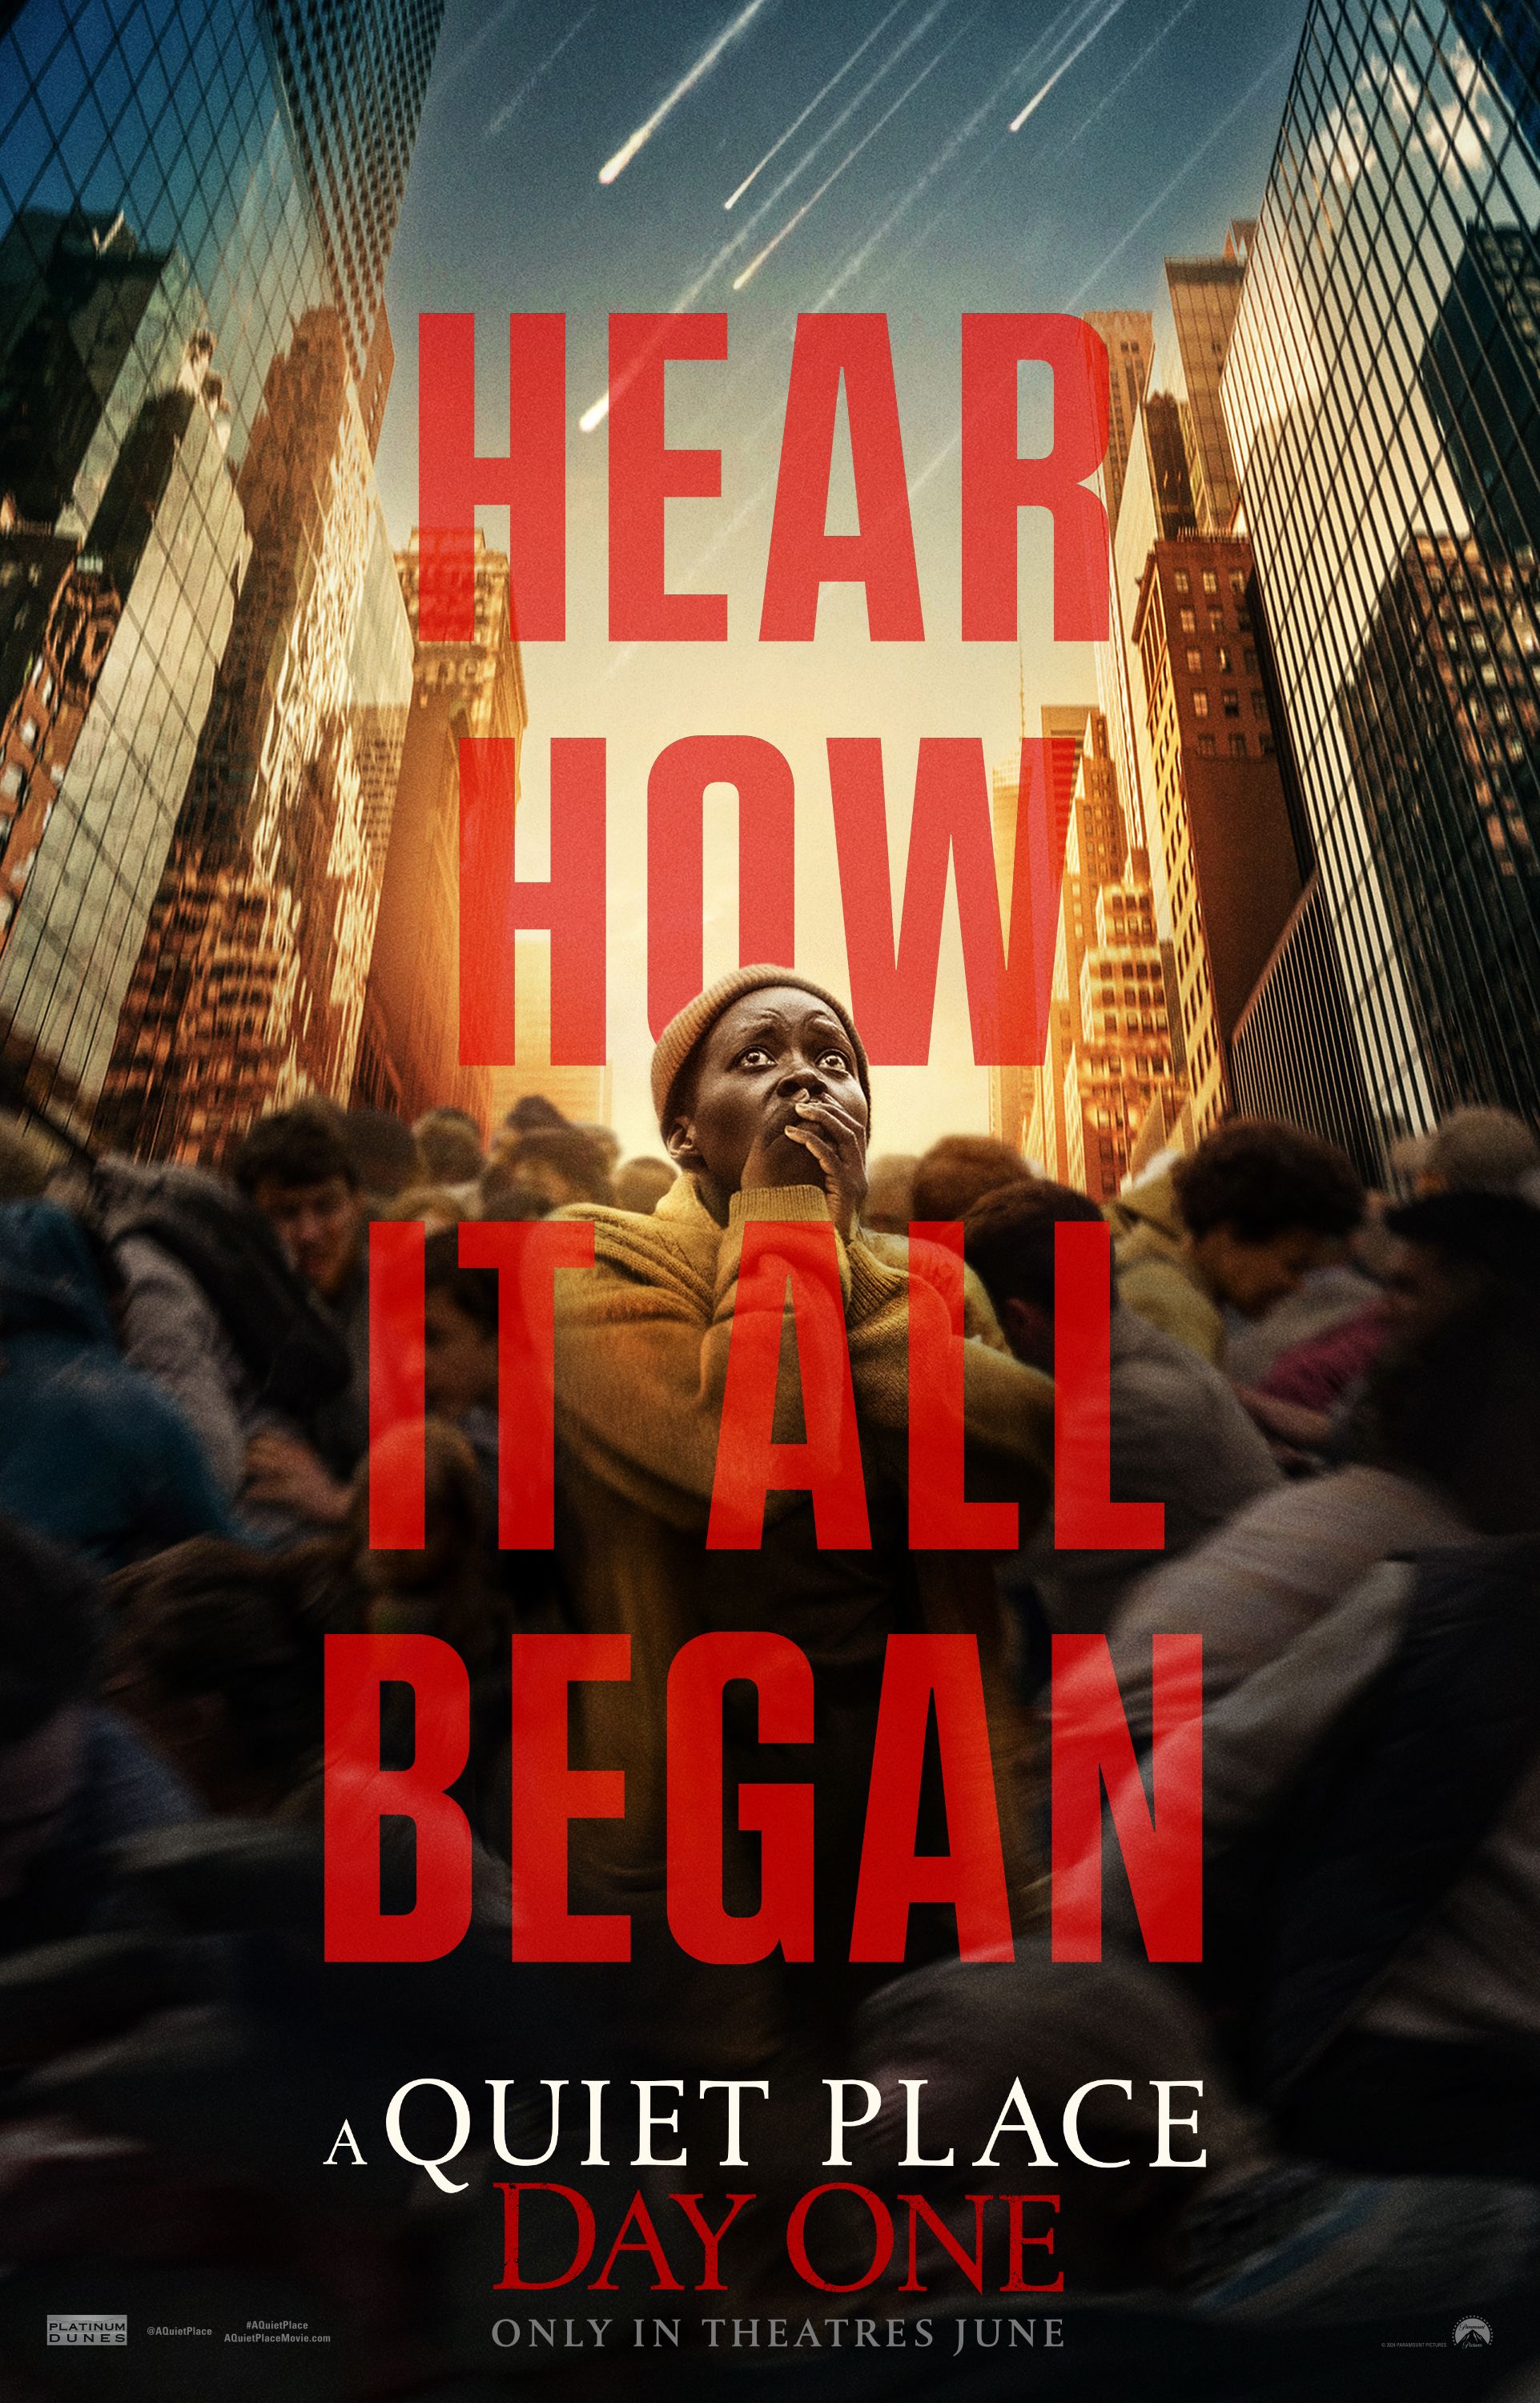 A Quiet Place Day One Poster Showing Lupita Nyong'o Covering Her Mouth